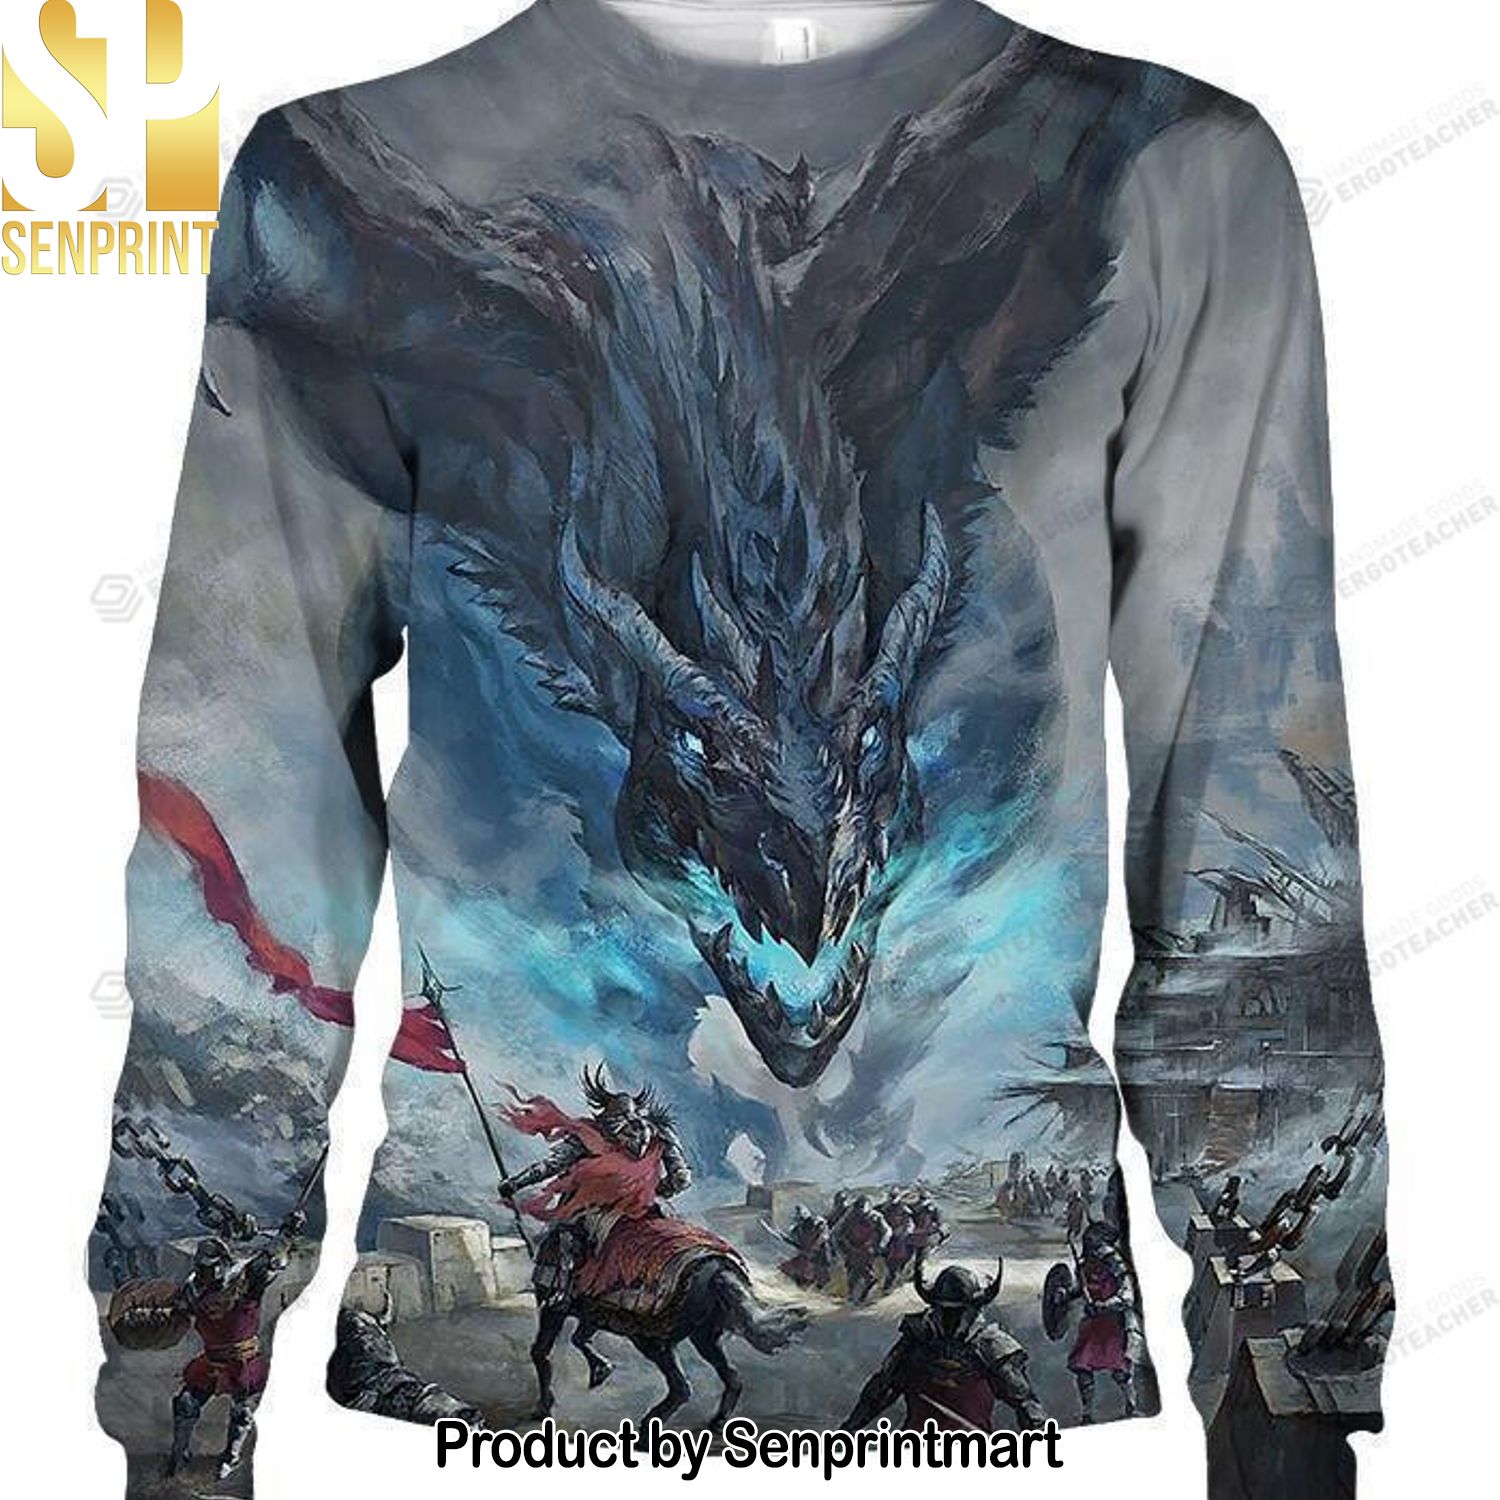 All Over Print Viserion Dragon Knitting Pattern Ugly Christmas Holiday Sweater